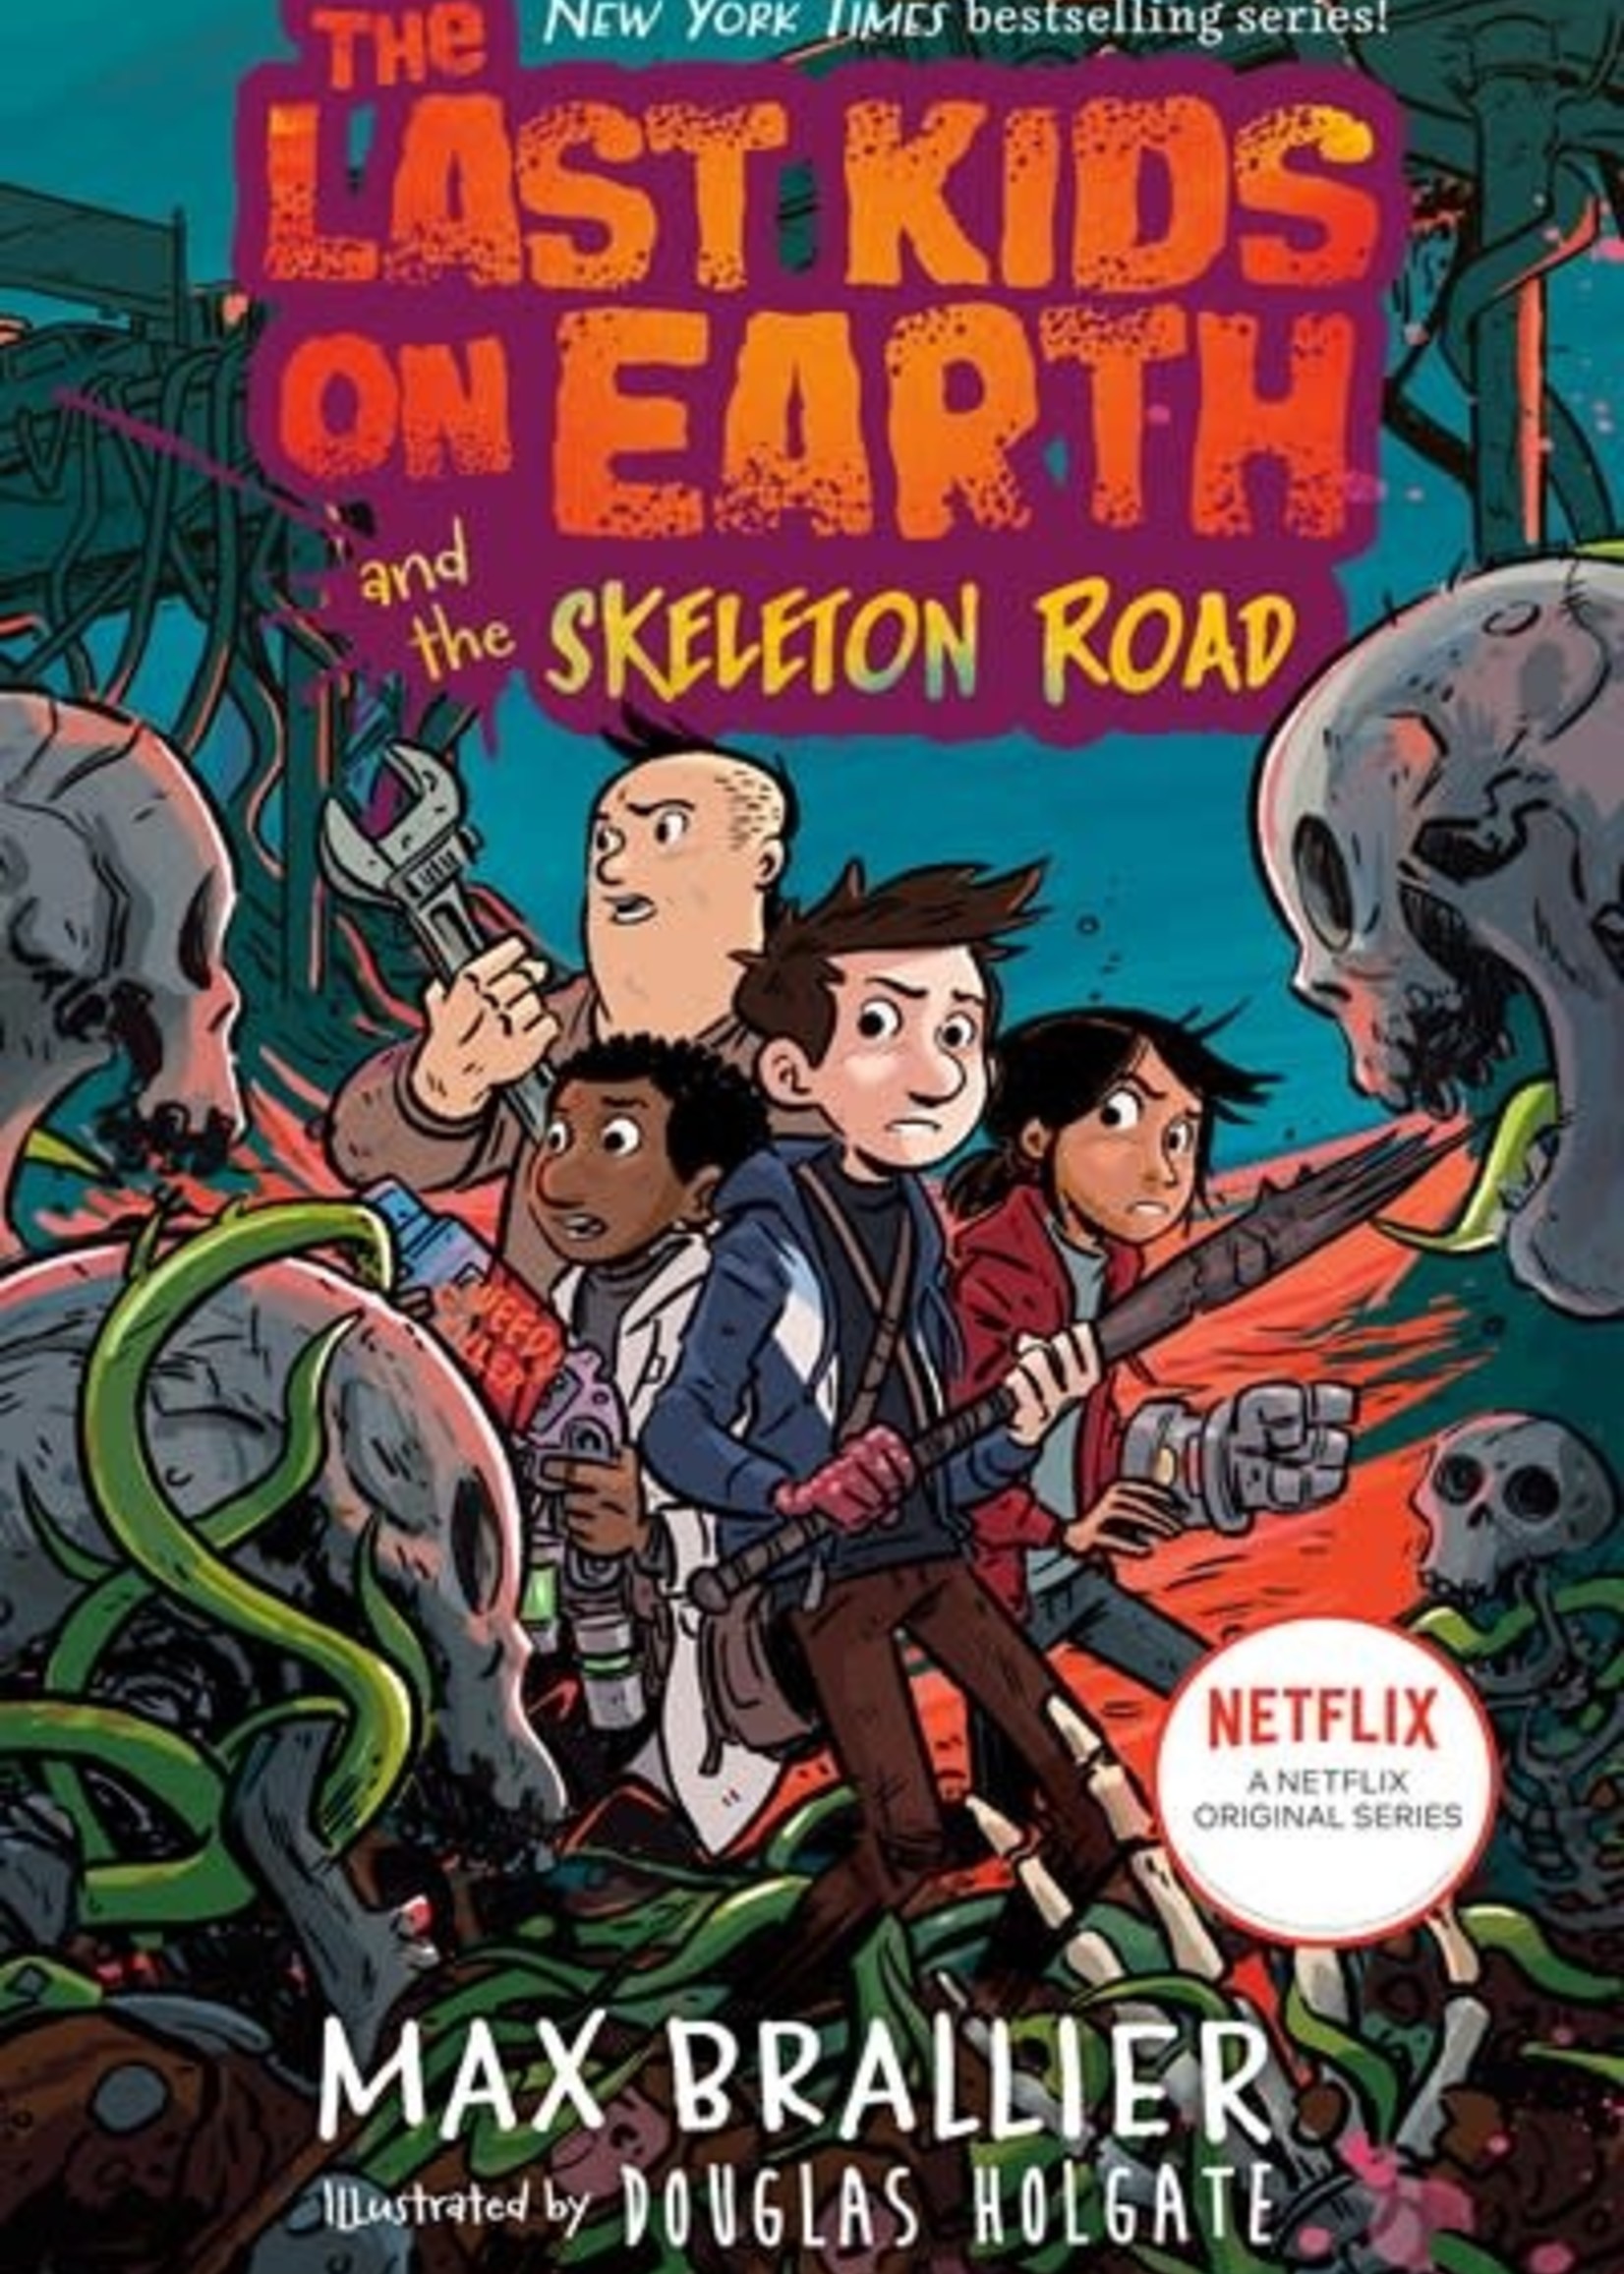 The Last Kids on Earth and the Skeleton Road, Book 6